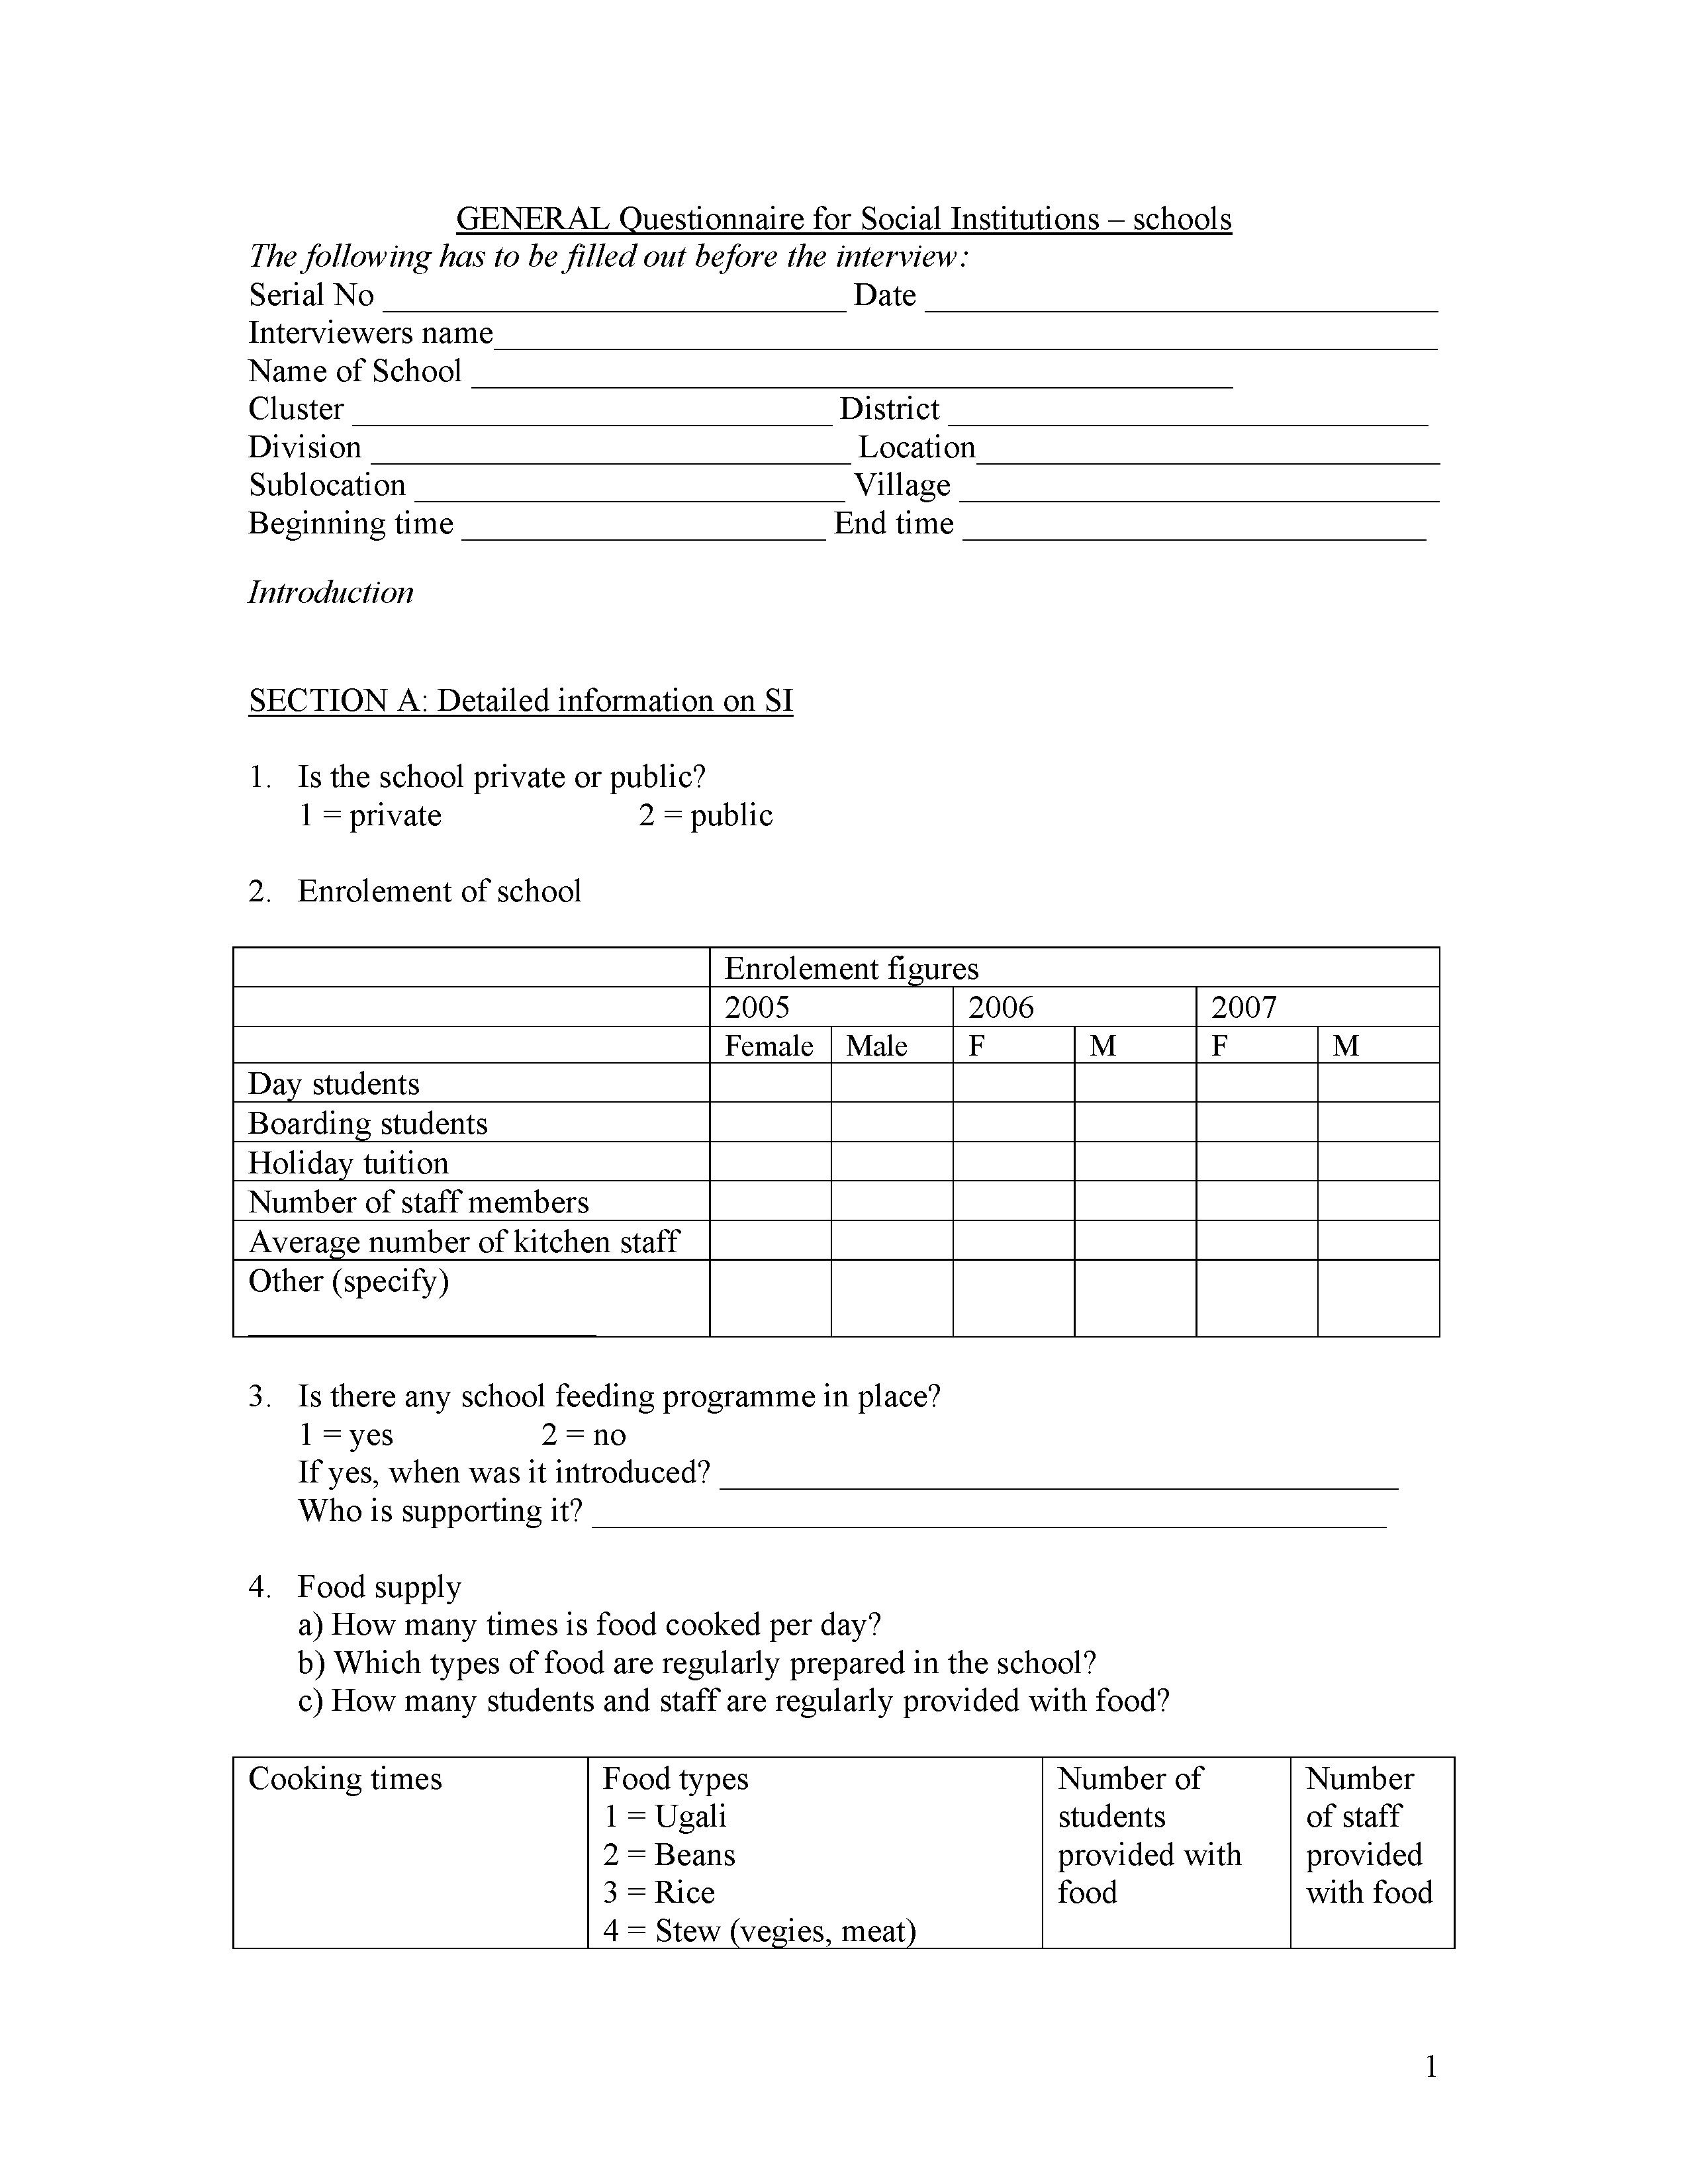 Questionnaire for Social Institutions in Kenya